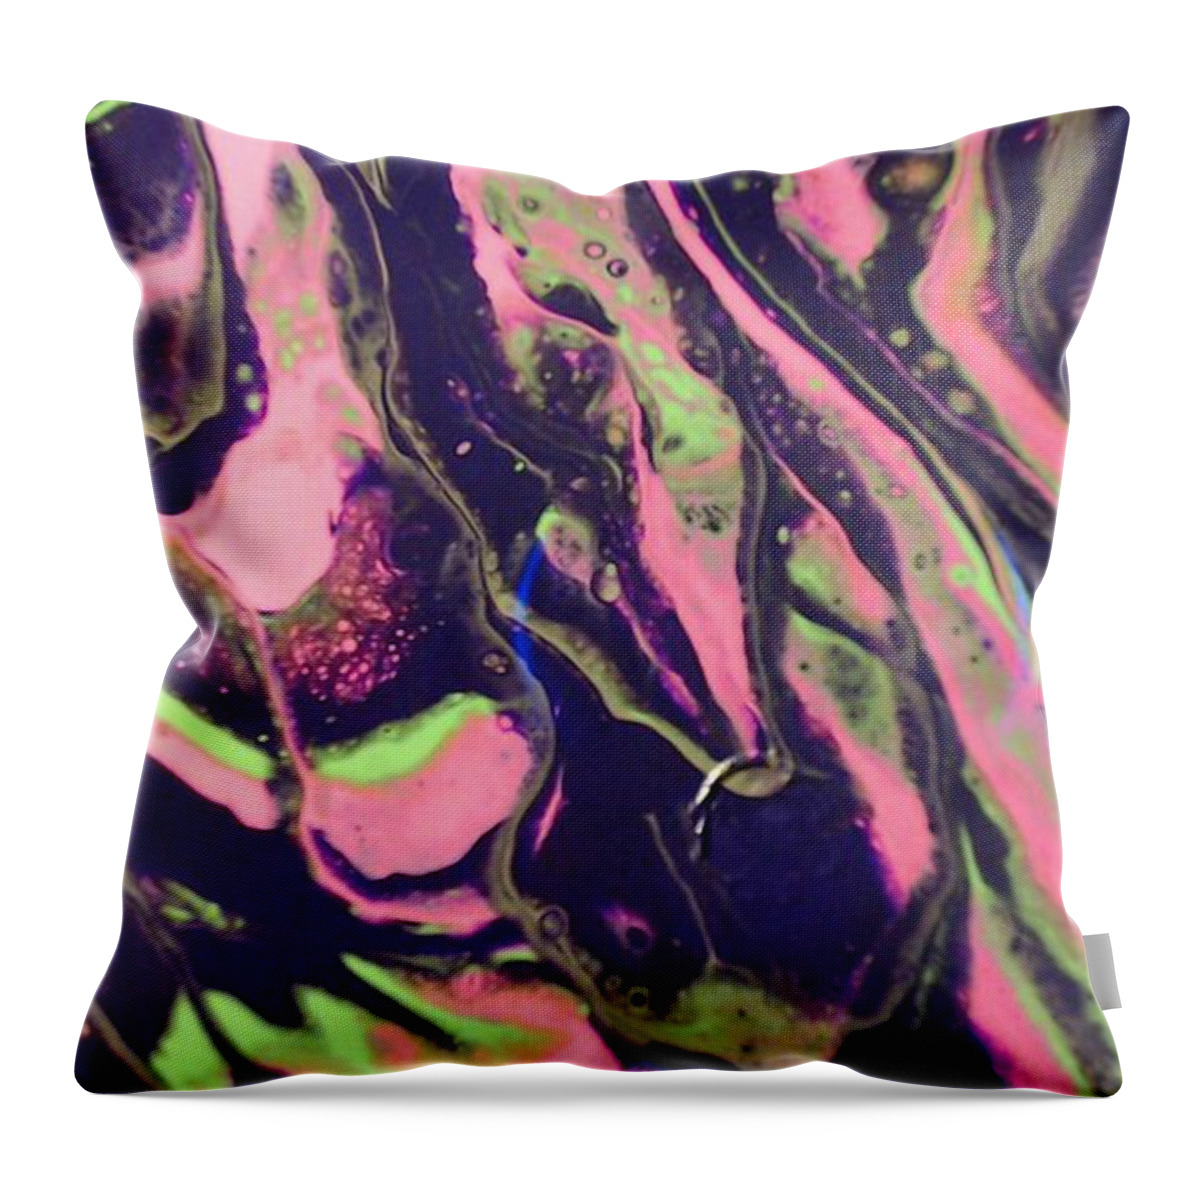 Abstracts Throw Pillow featuring the painting Space Snake by C Maria Wall